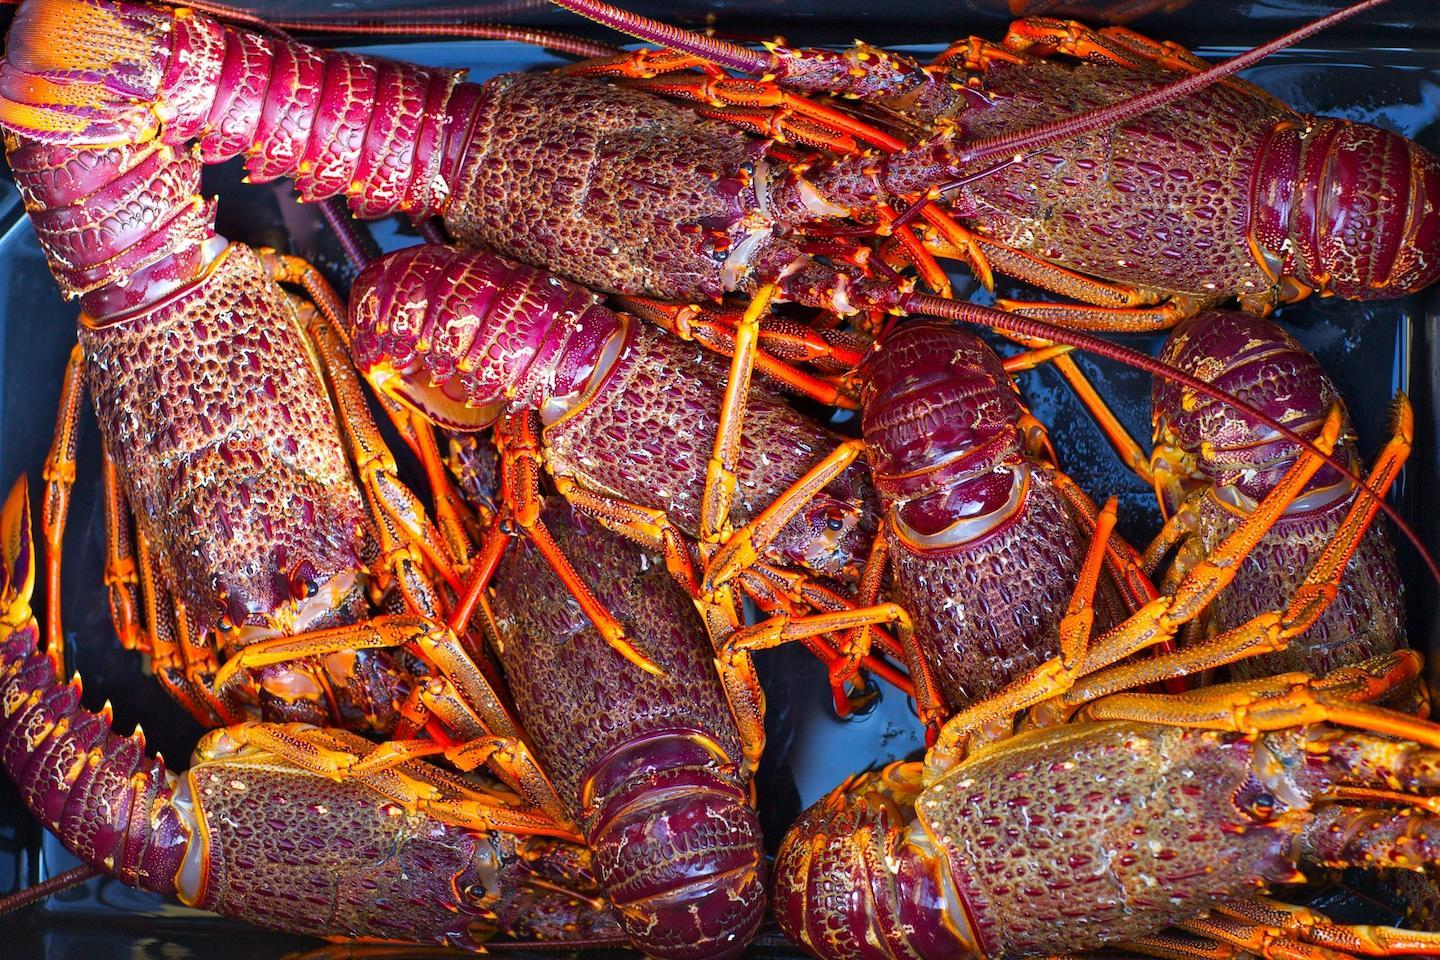 Rock lobster or Crayfish in the bay of islands